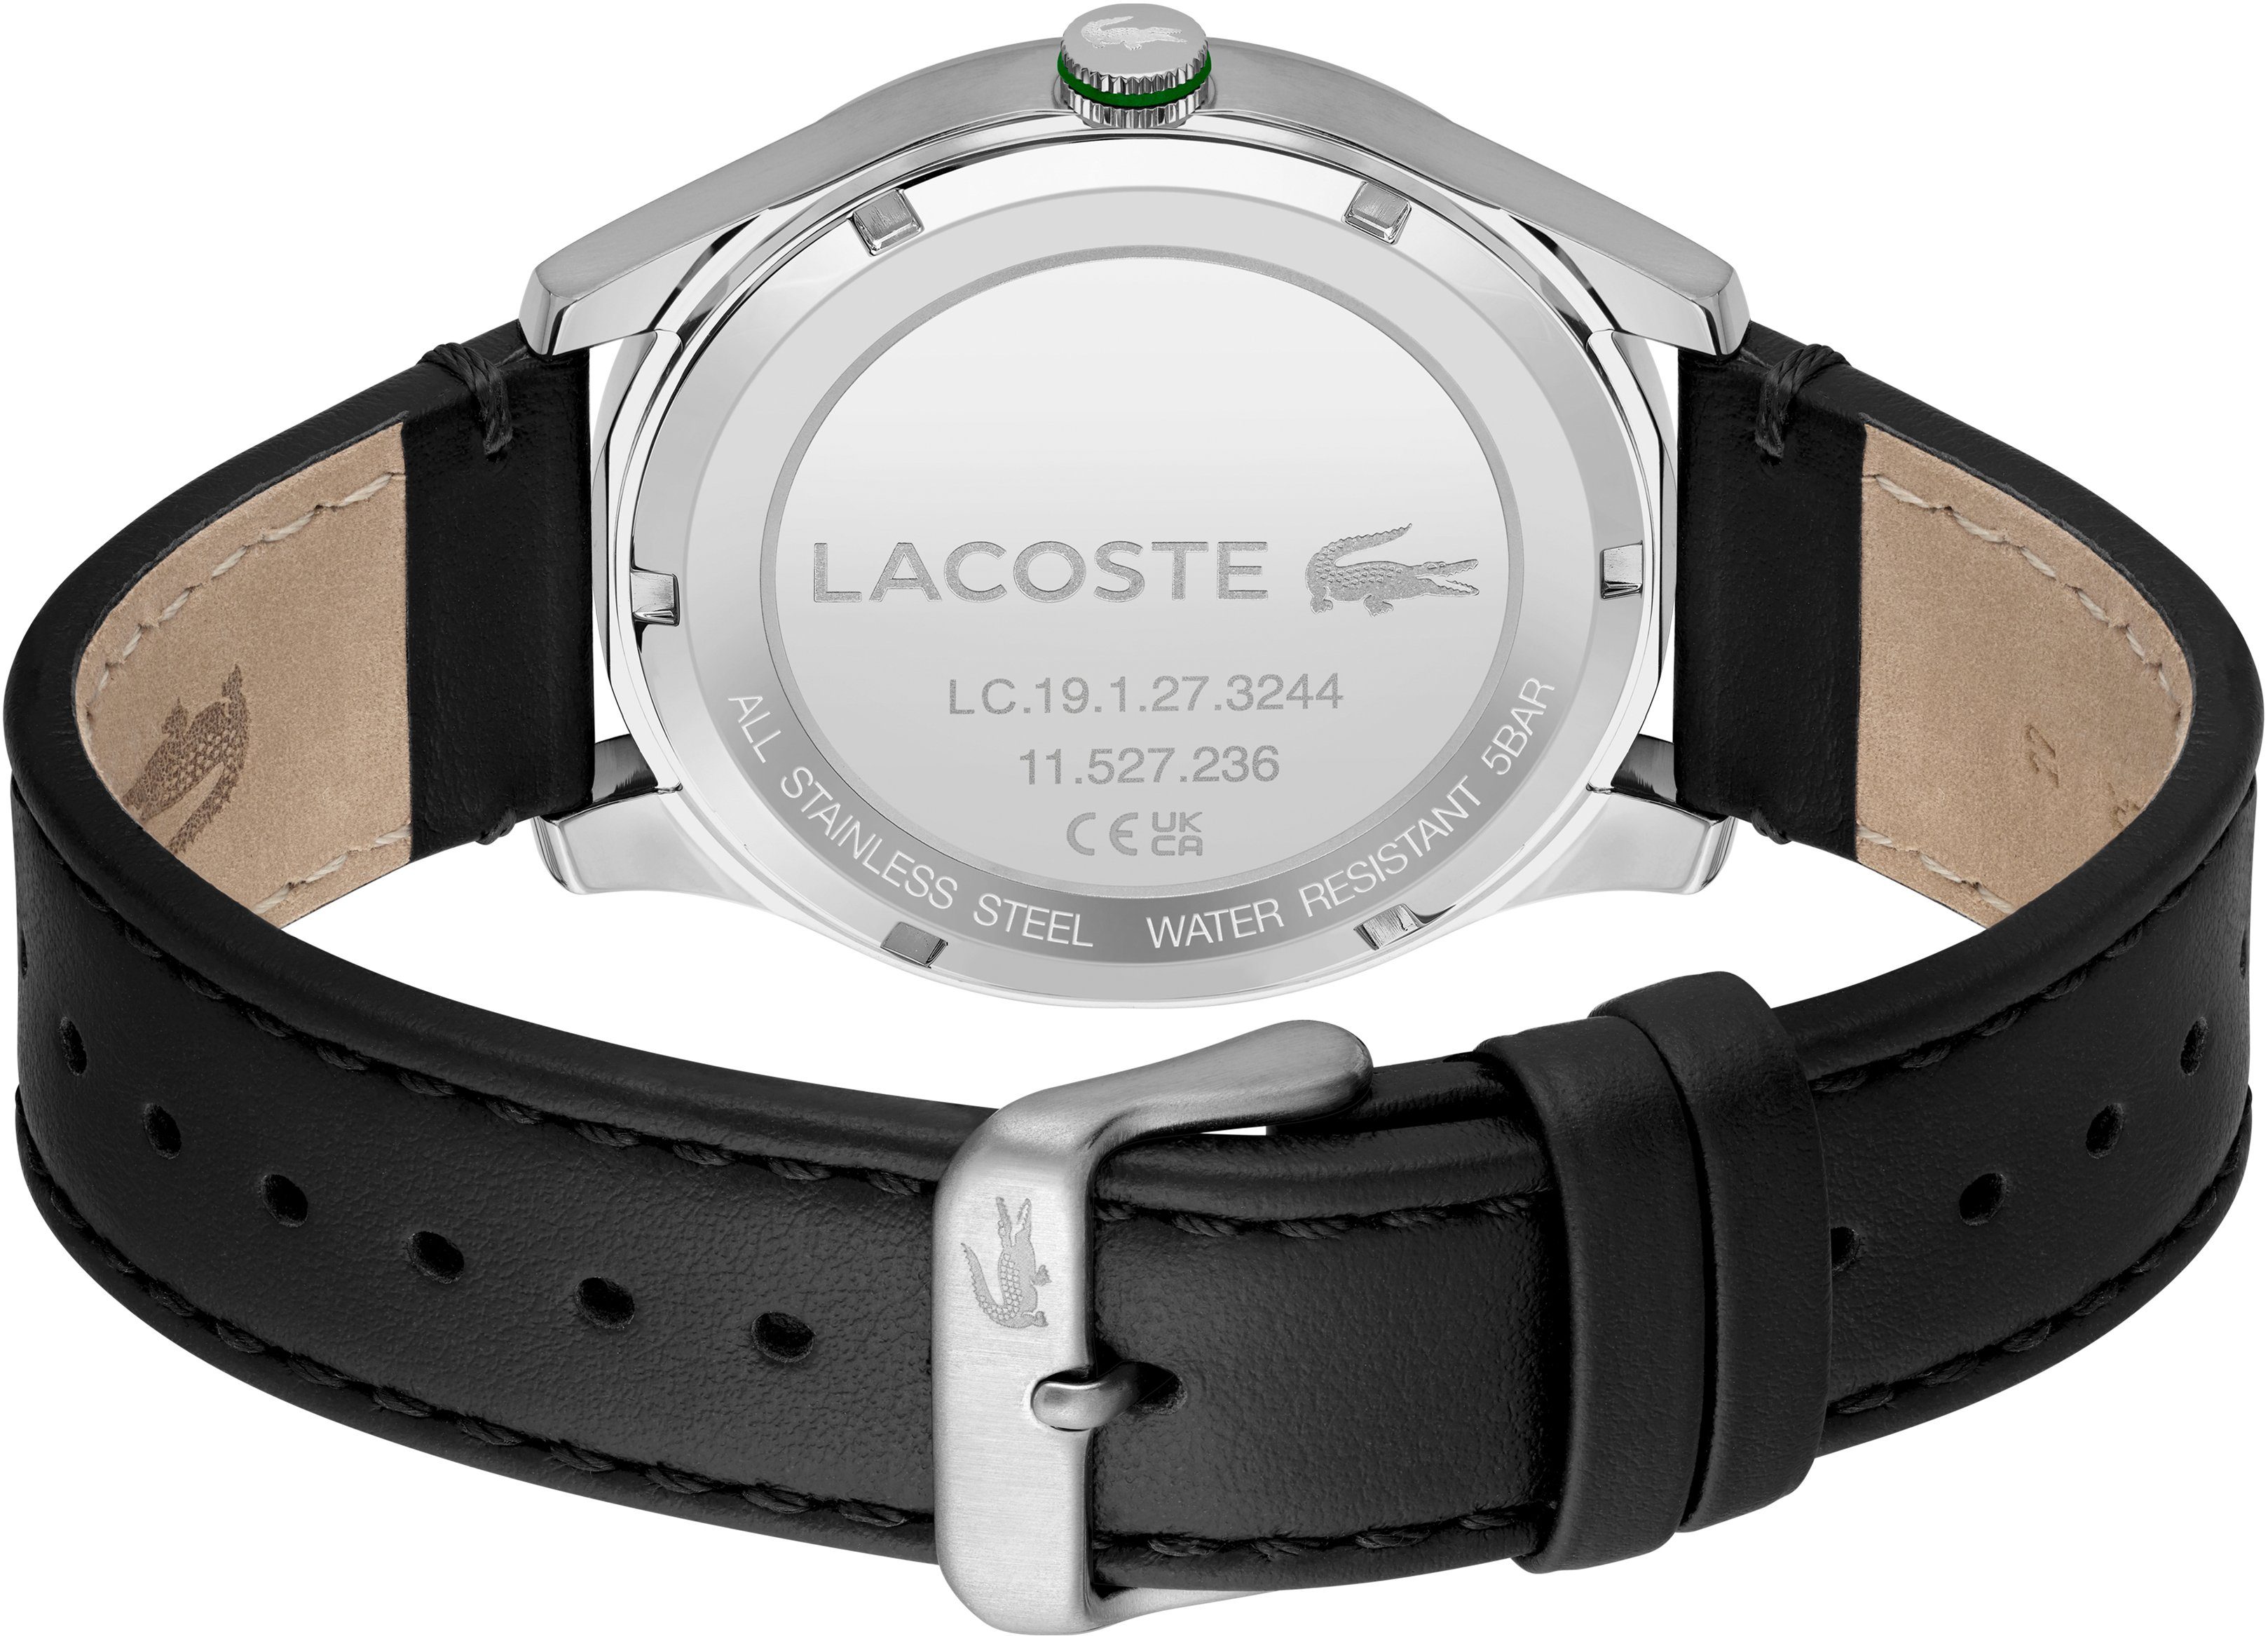 2011209 Lacoste Multifunktionsuhr MUSKETEER,